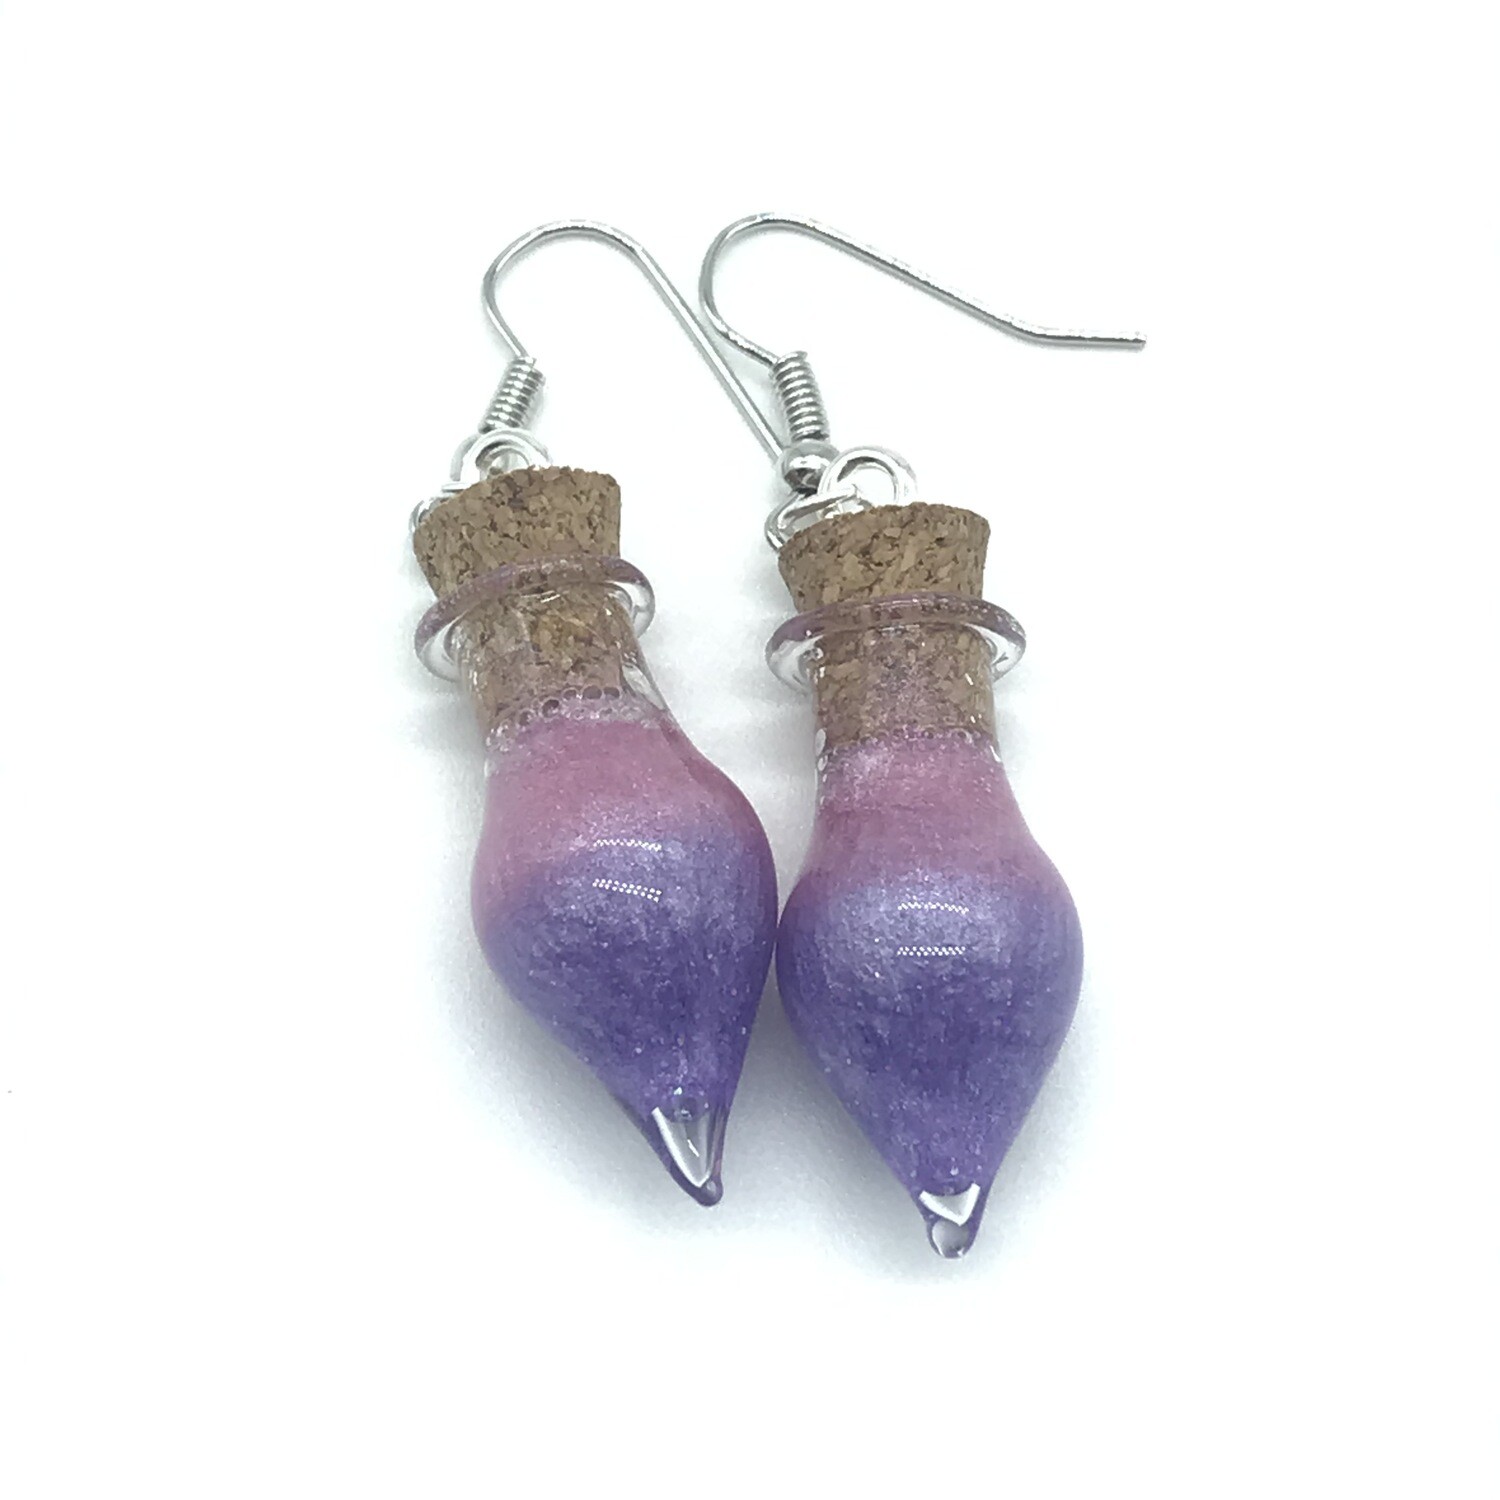 Potion Earrings - Lavender and pink, drop bottle